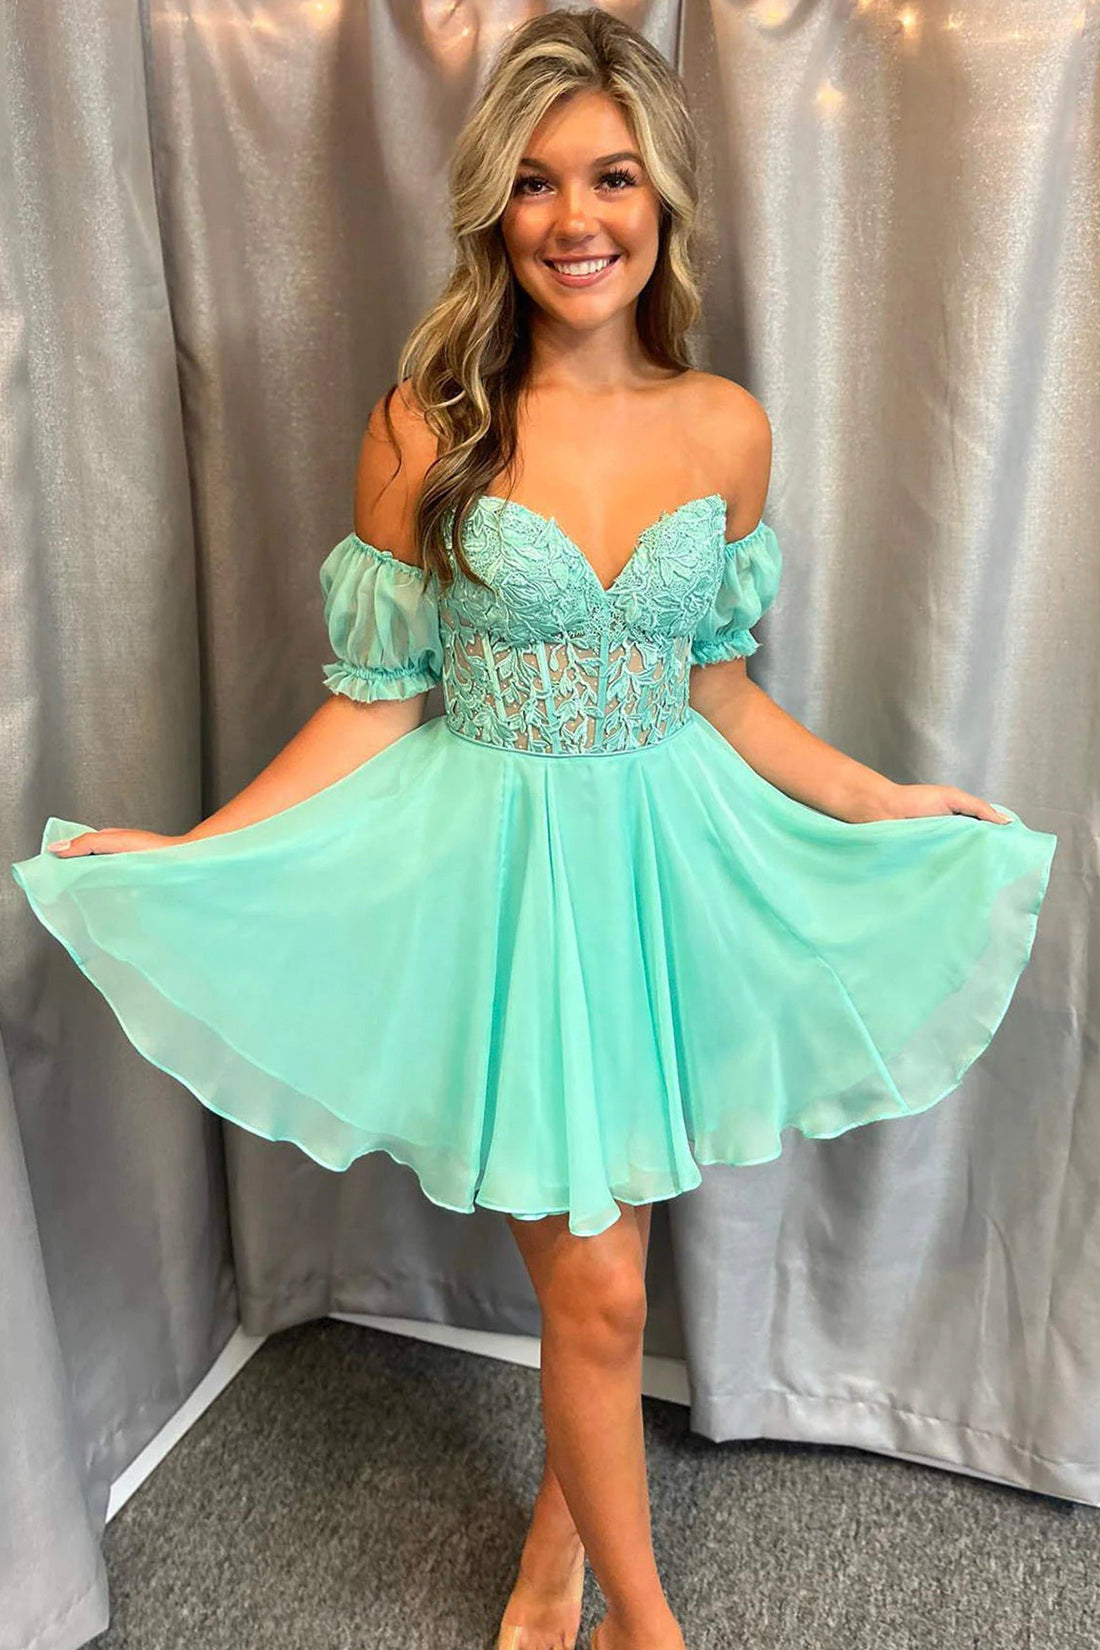 Green Chiffon Lace Short Prom Dress, Off the Shoulder Evening Party Dress